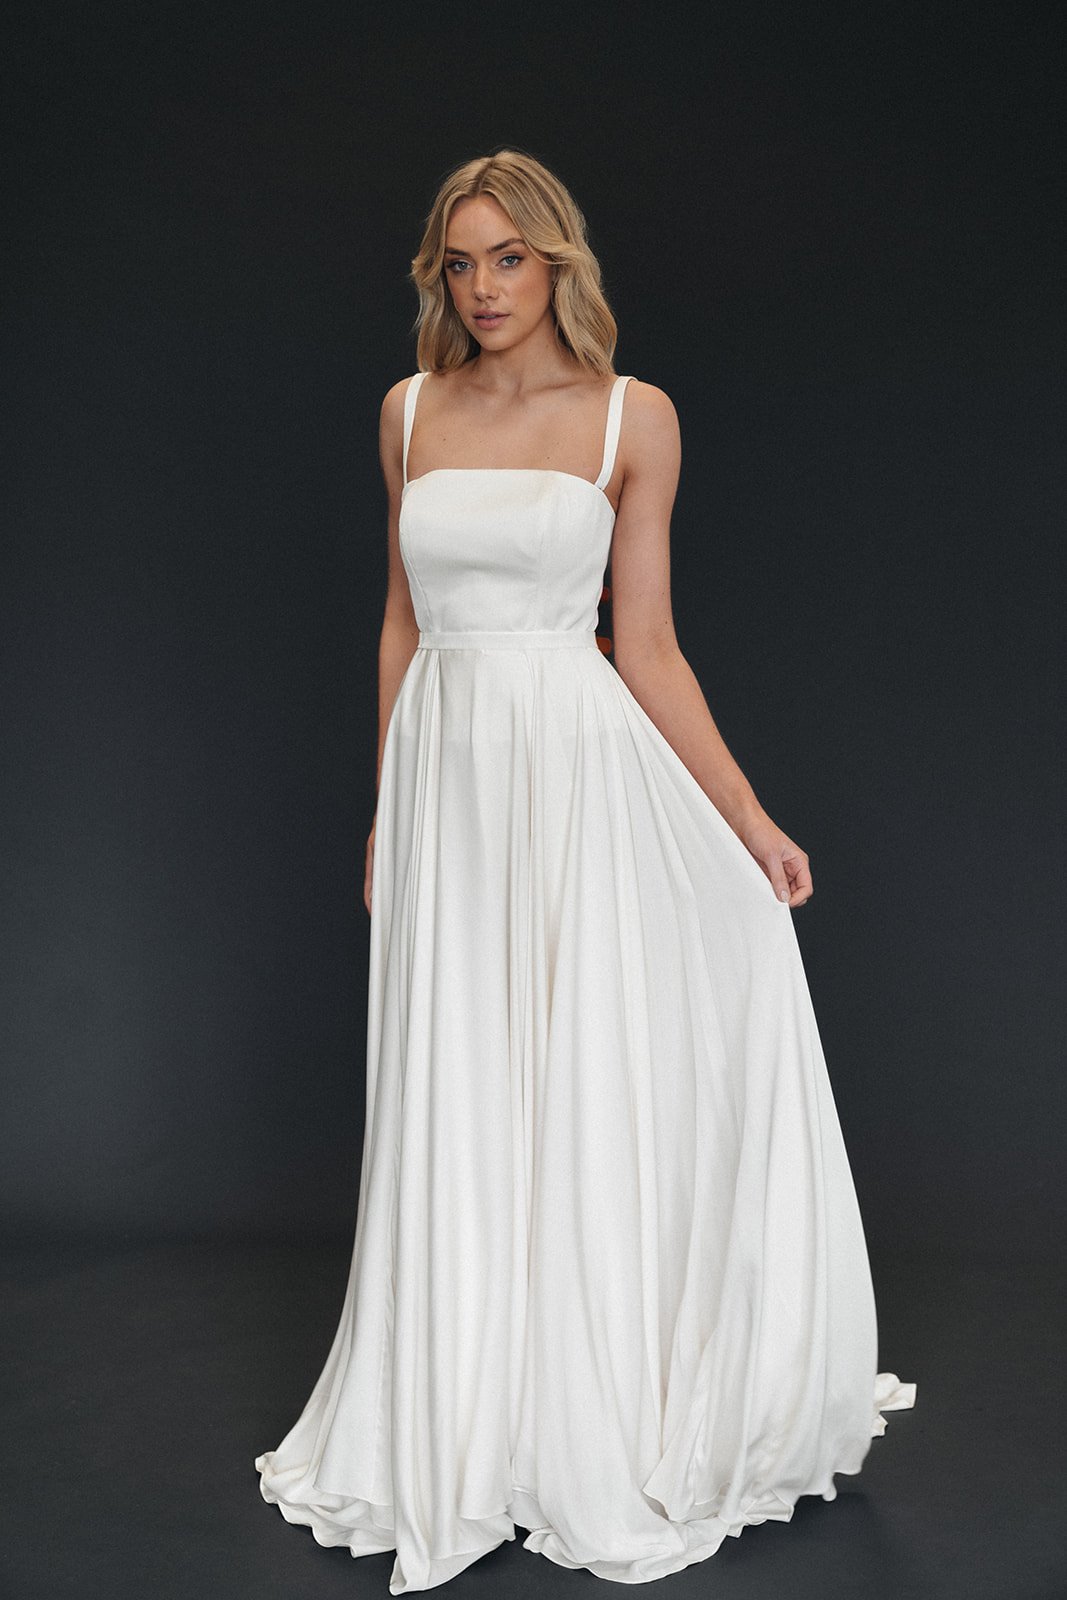 The Dublin Gown from Moira Hughes Couture with Straps.jpg